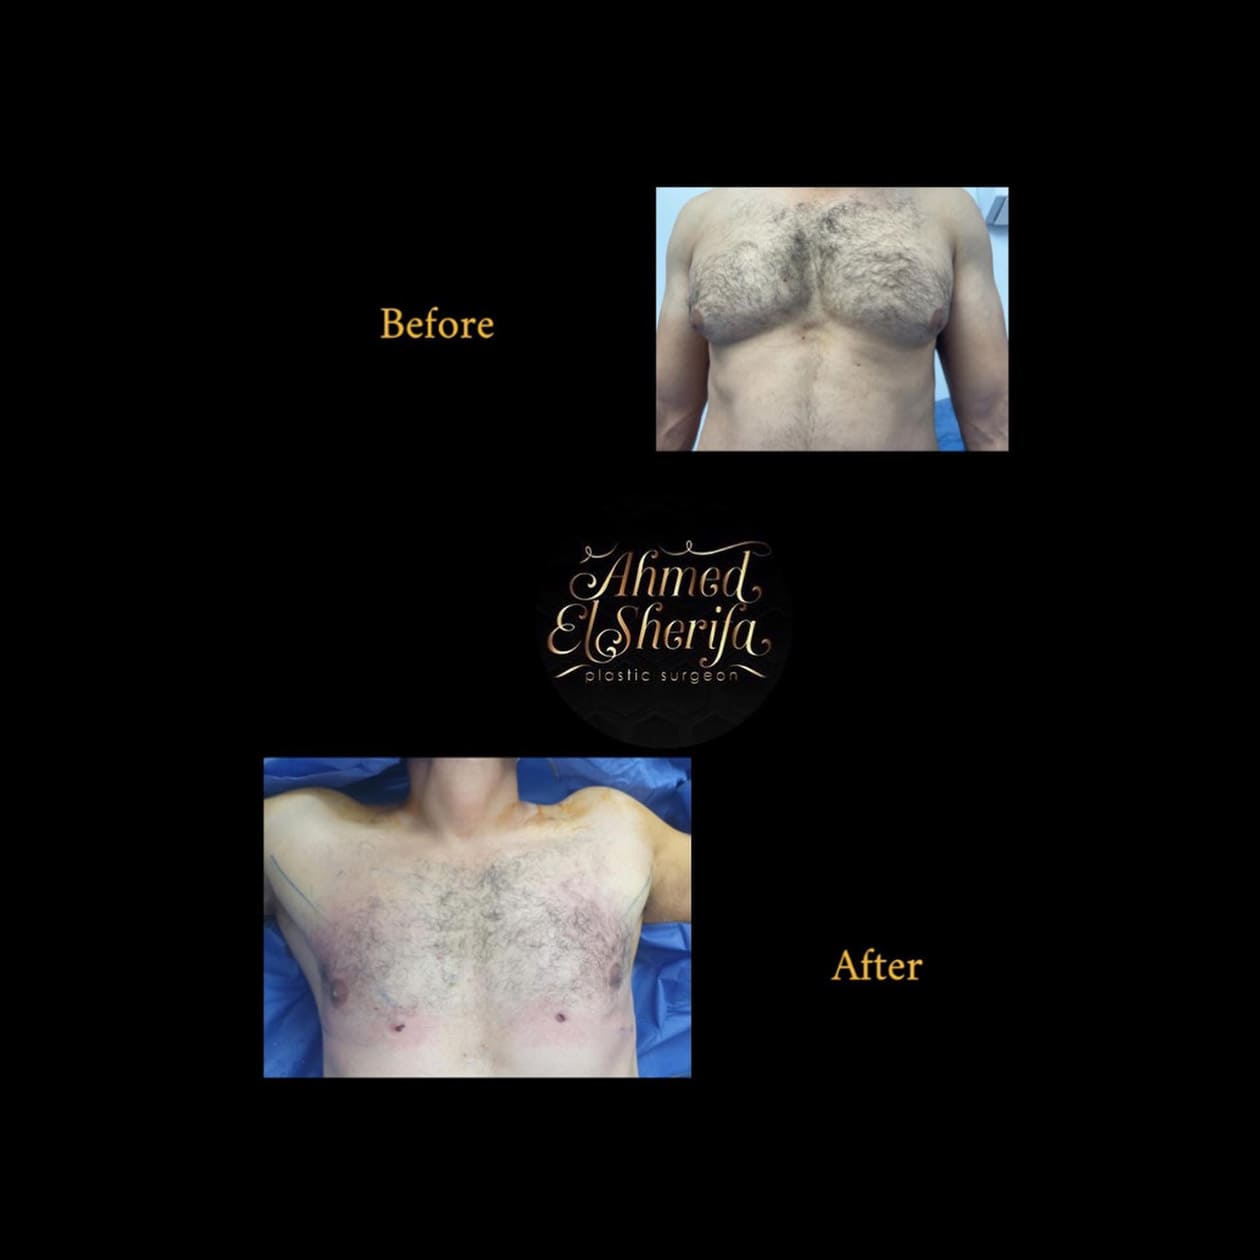 A successful case of gynecomastia in a young athlete